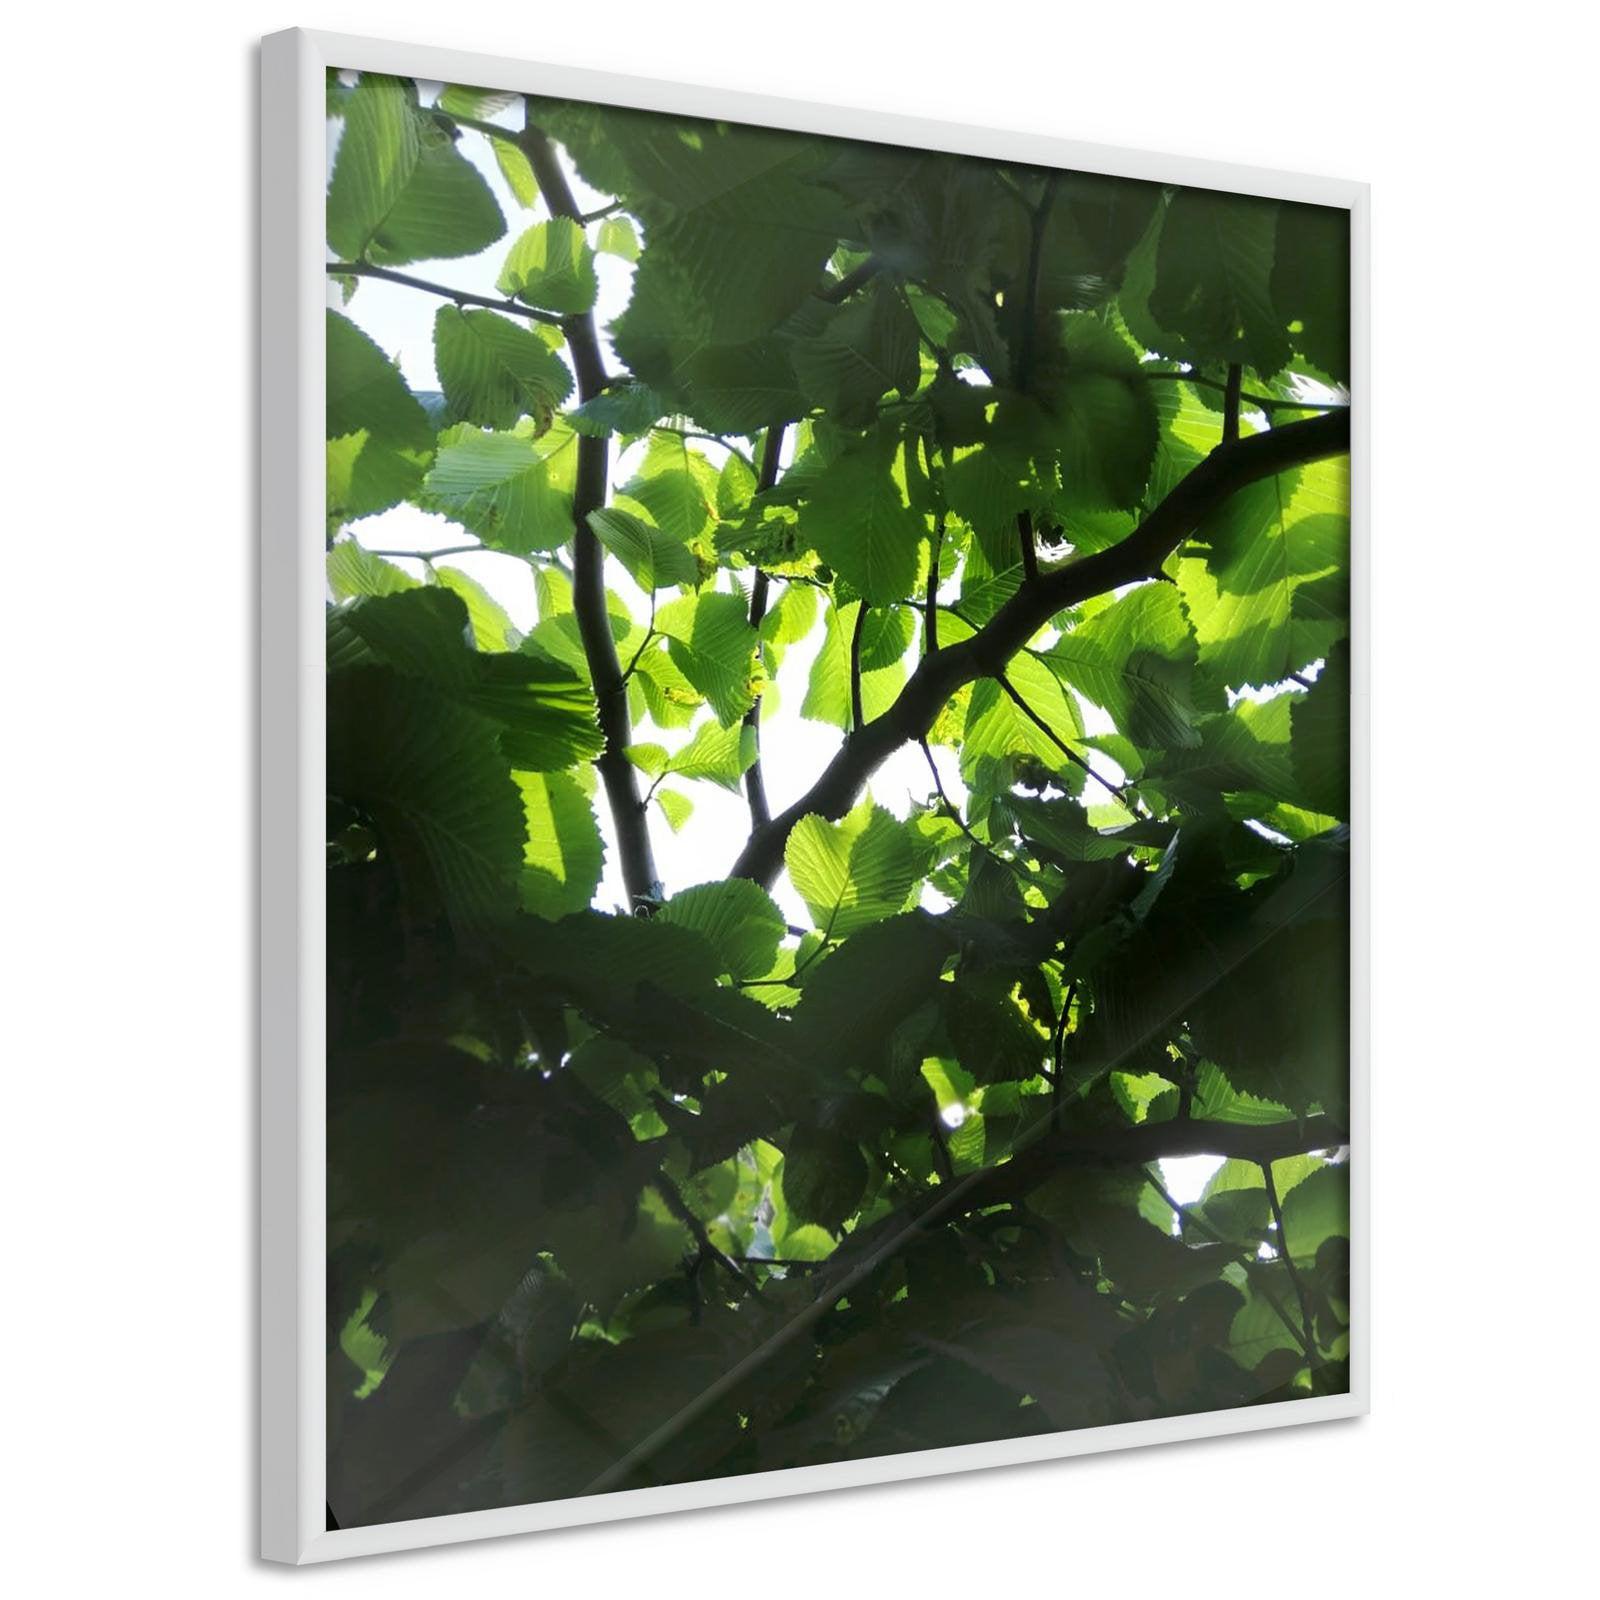 Inramad Poster / Tavla - Under Cover of Leaves-Poster Inramad-Artgeist-peaceofhome.se